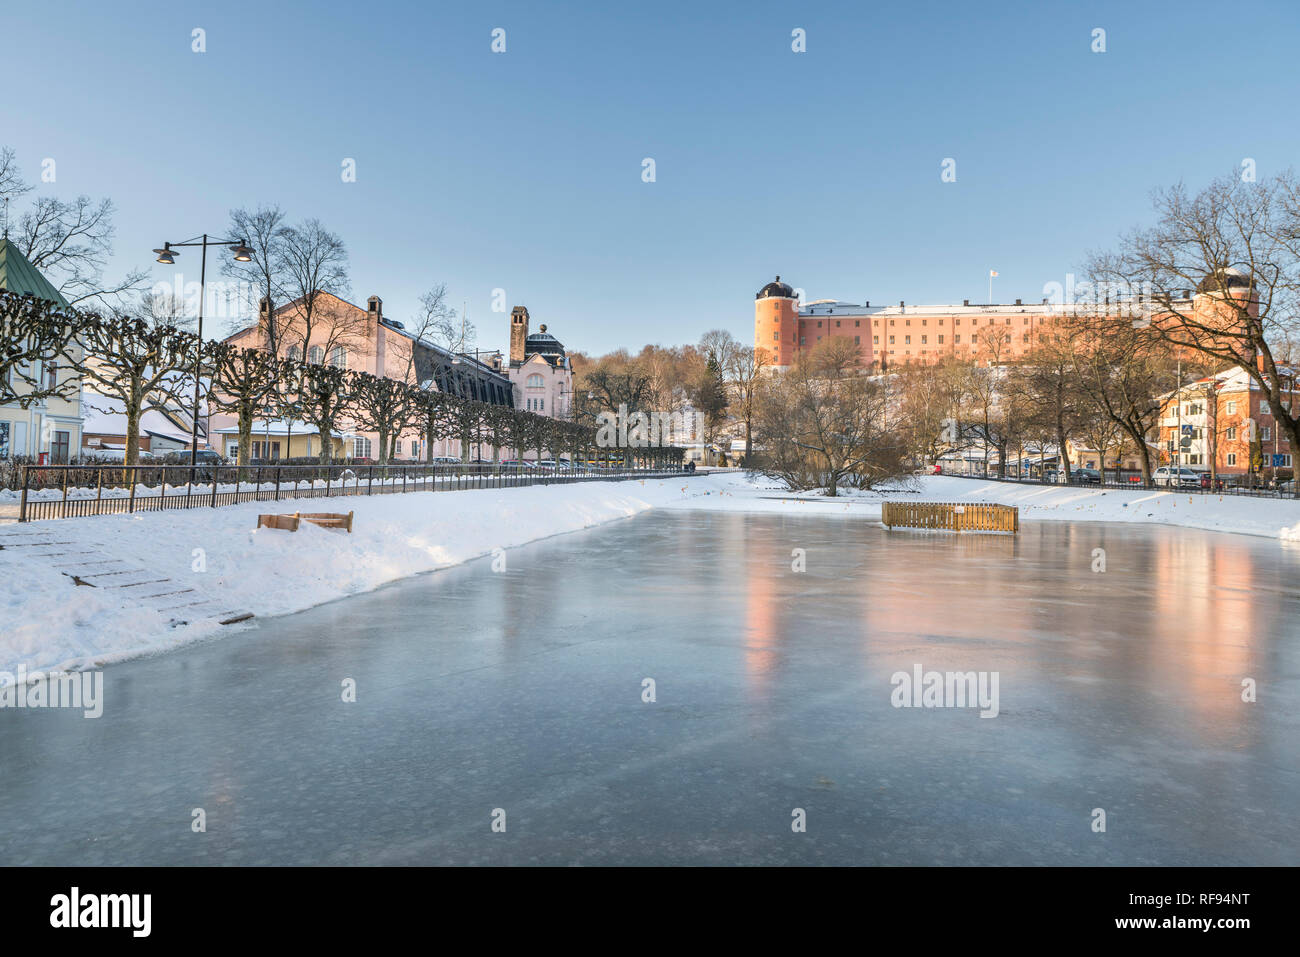 Ice for skating at. Svandammen, with the Castle in the background. Uppsala, Sweden, Scandinavia. Stock Photo